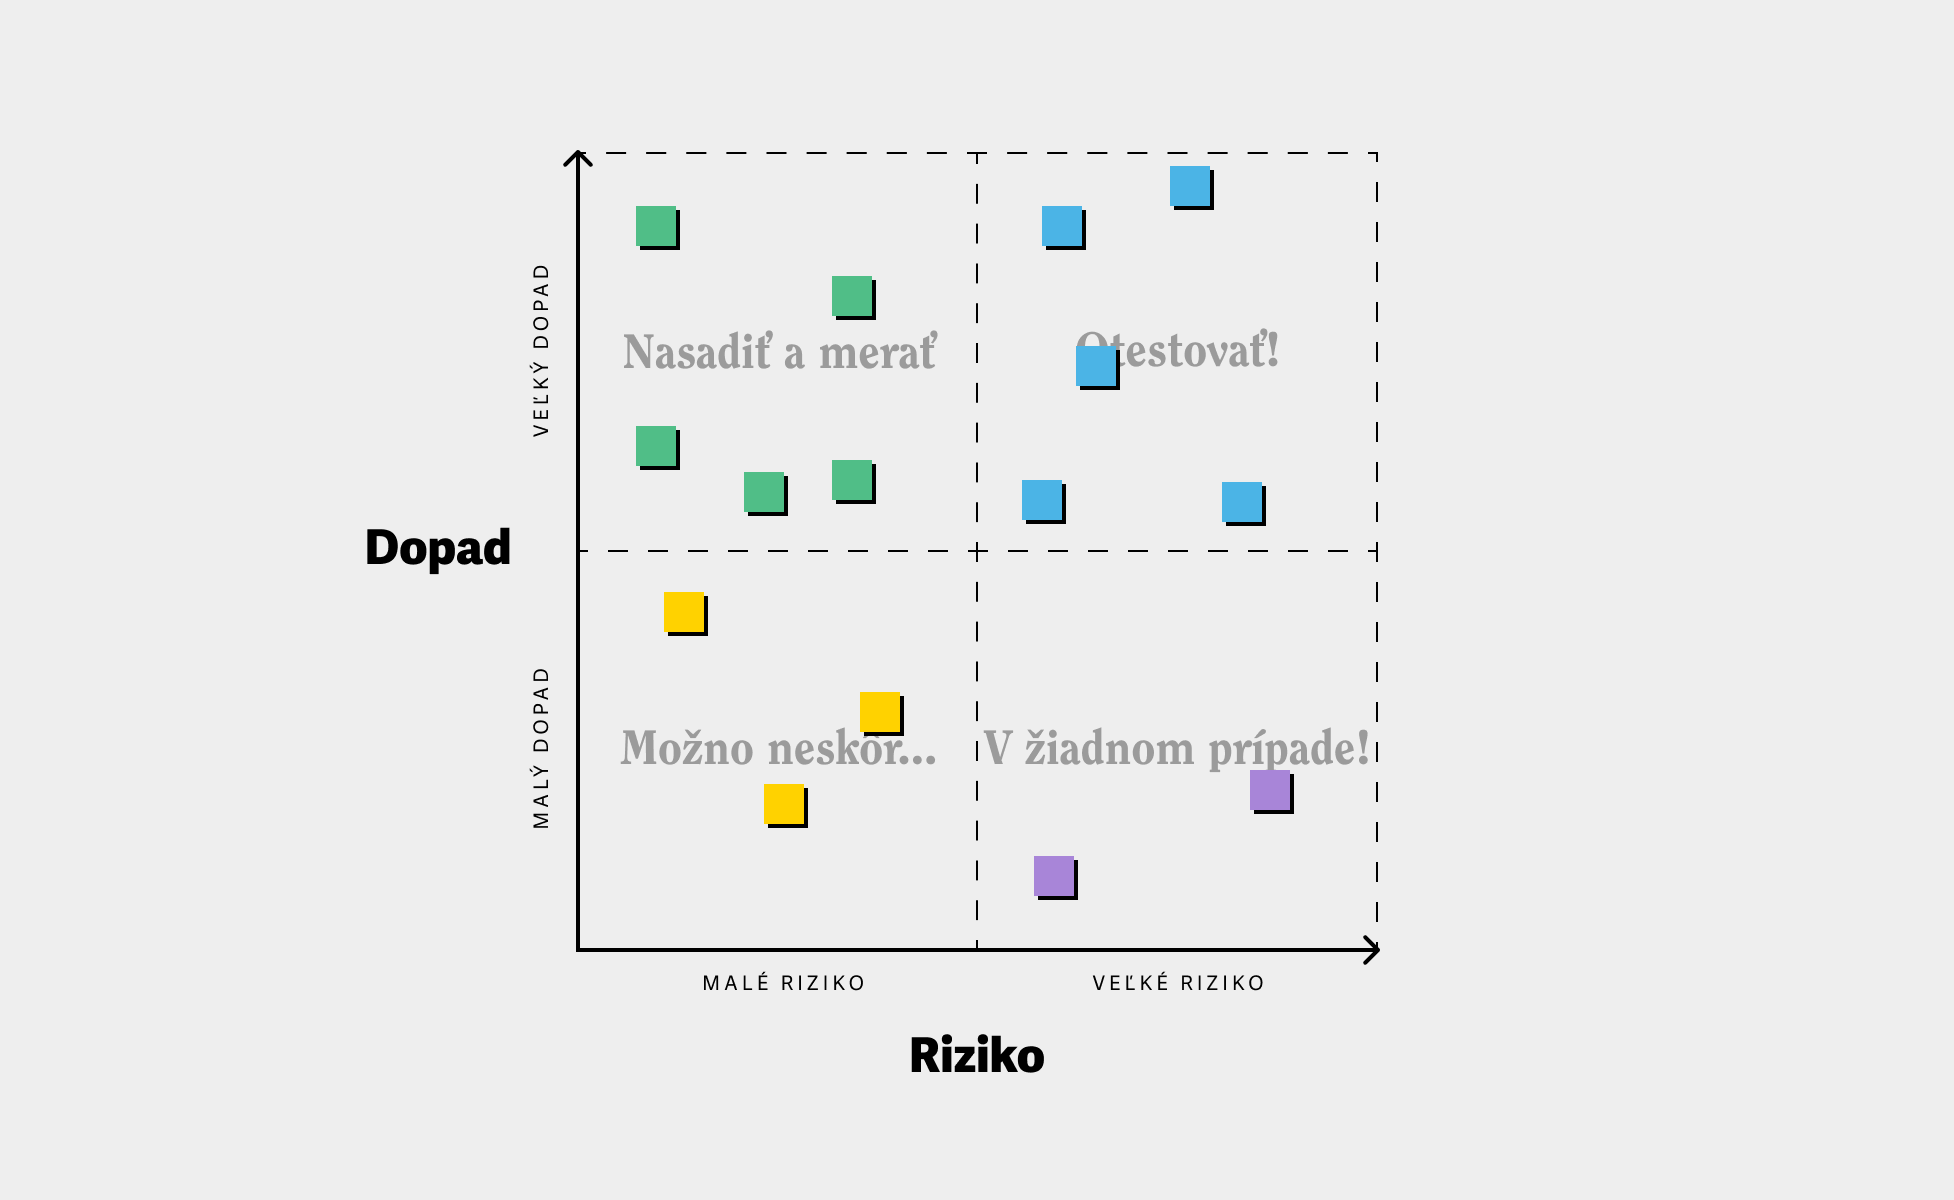 Example of how an impact-risk matrix